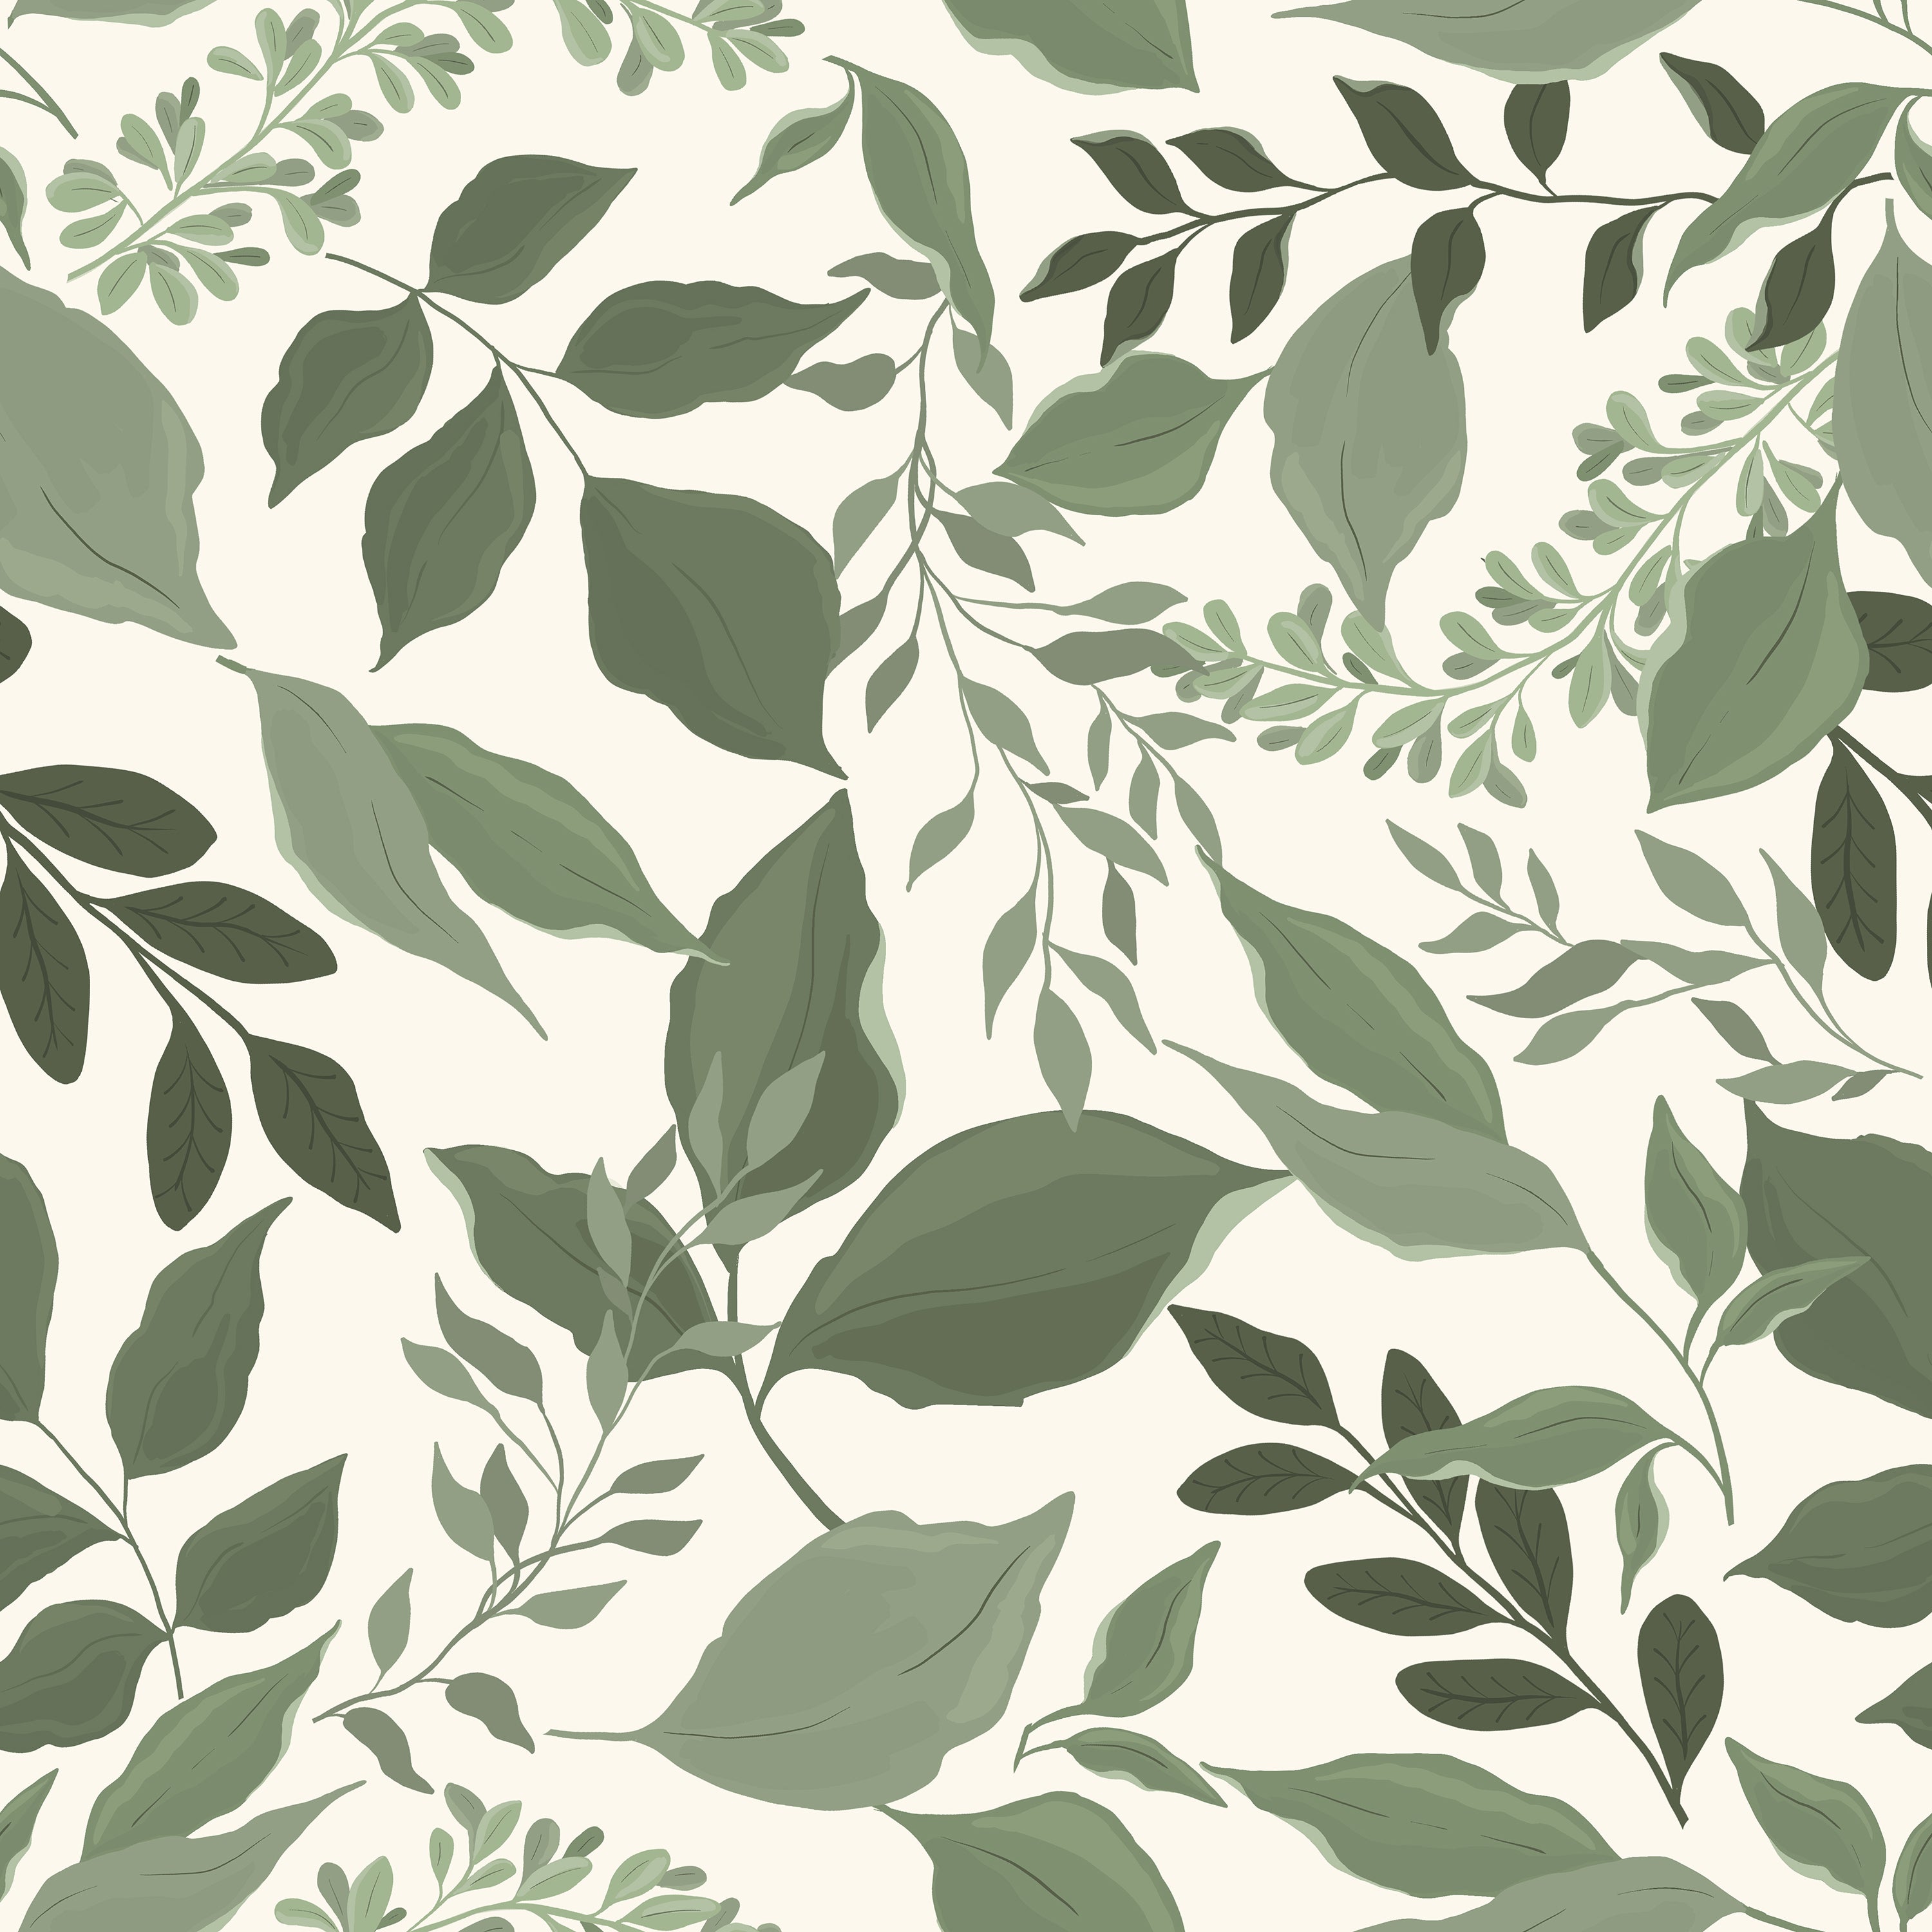 a wallpaper image showcasing the "Green Goddess Wallpaper." The wallpaper features an all-over print of leafy branches in various shades of green. The design includes a variety of leaf shapes and sizes on a neutral, creamy background, giving the impression of a lush and tranquil garden.